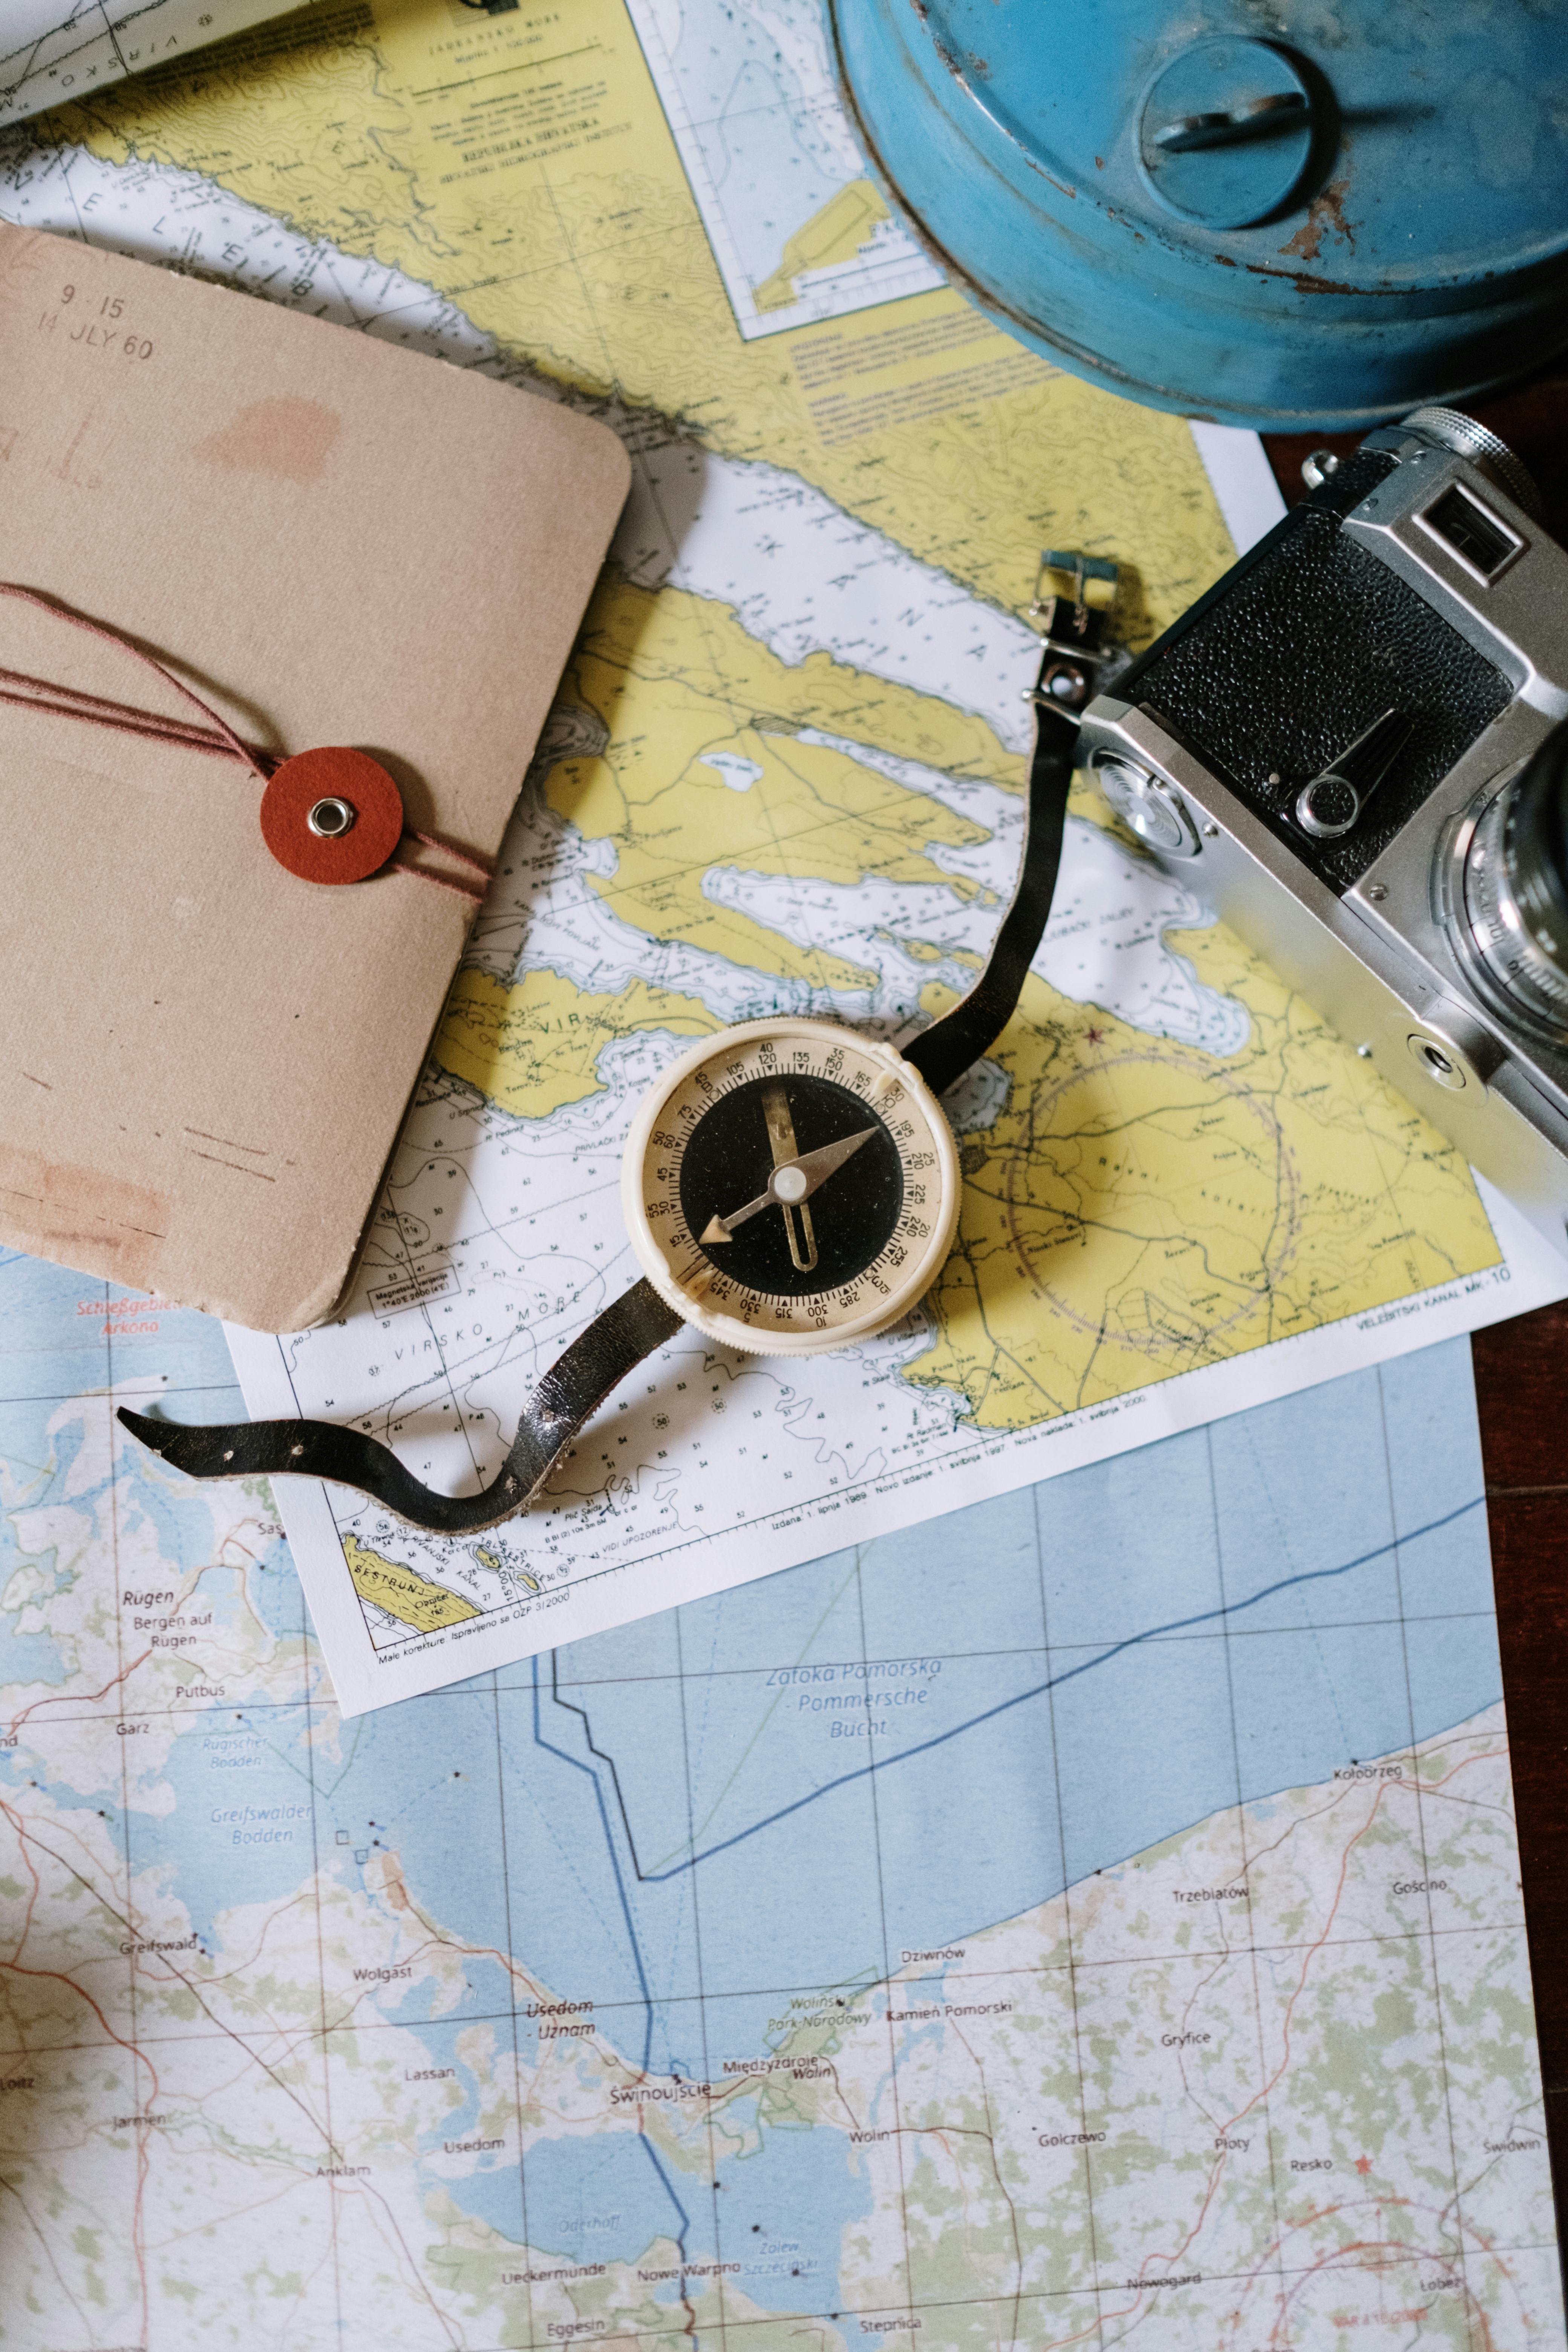 A compass and an old camera lying on a table | Source: Pexels